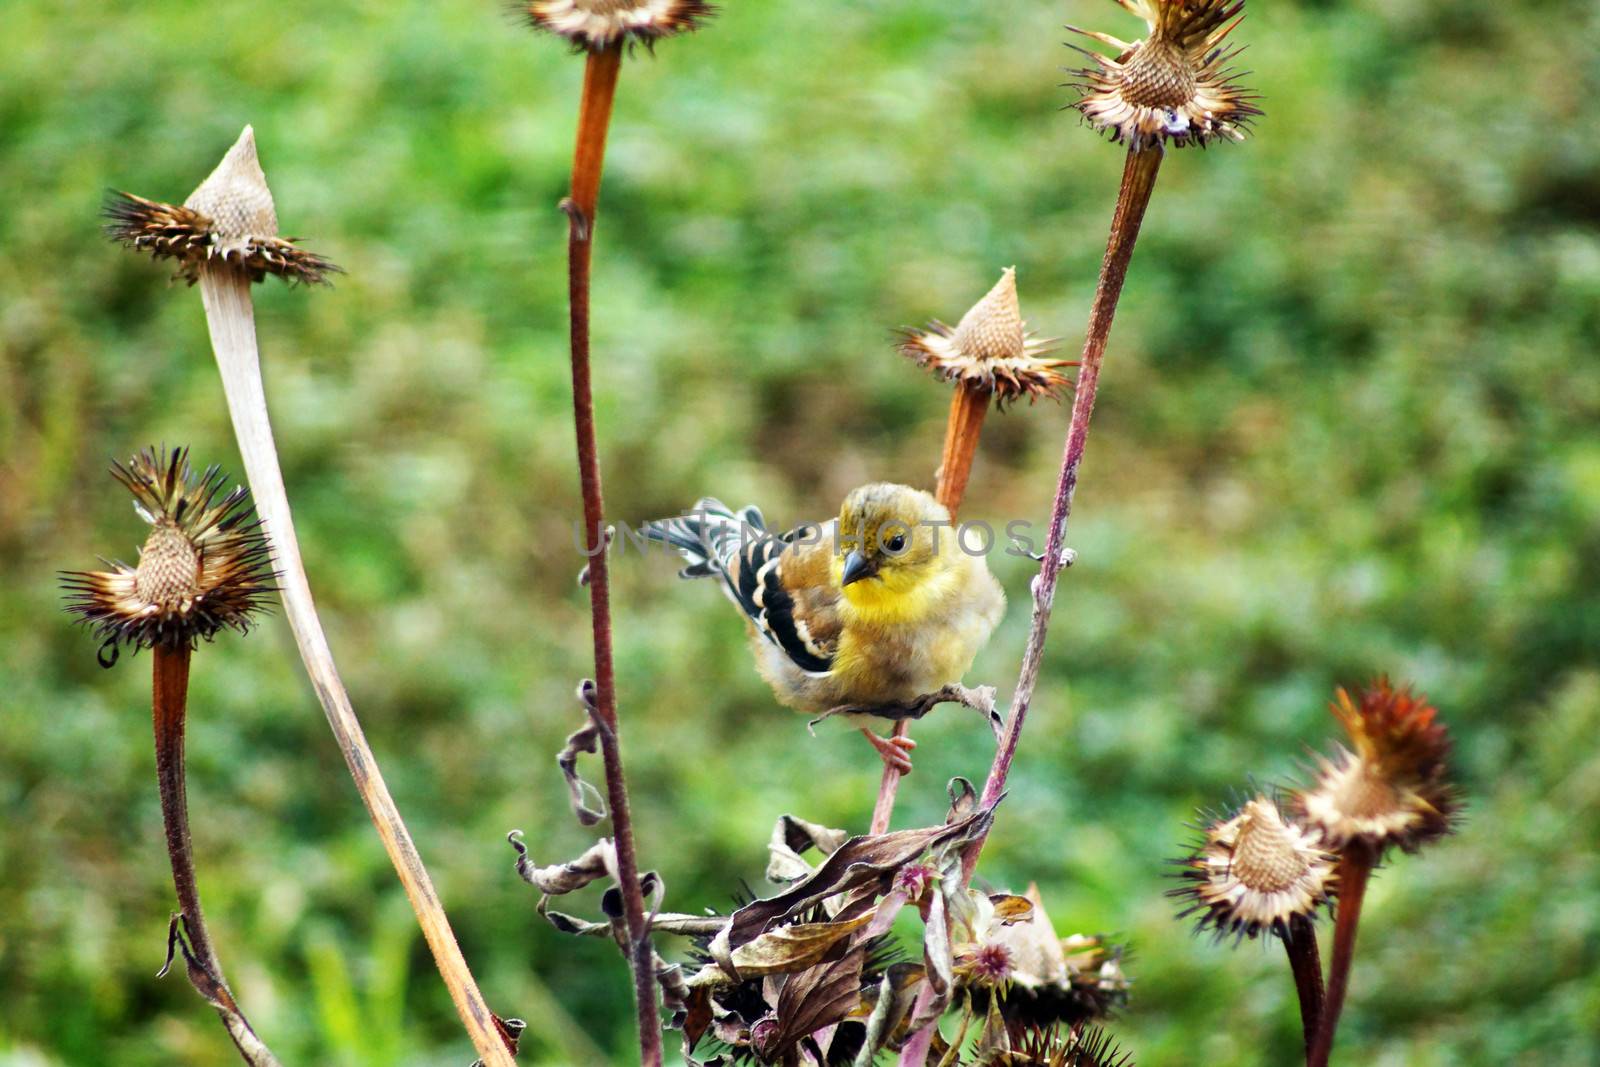 Goldfinch on coneflower by Mirage3